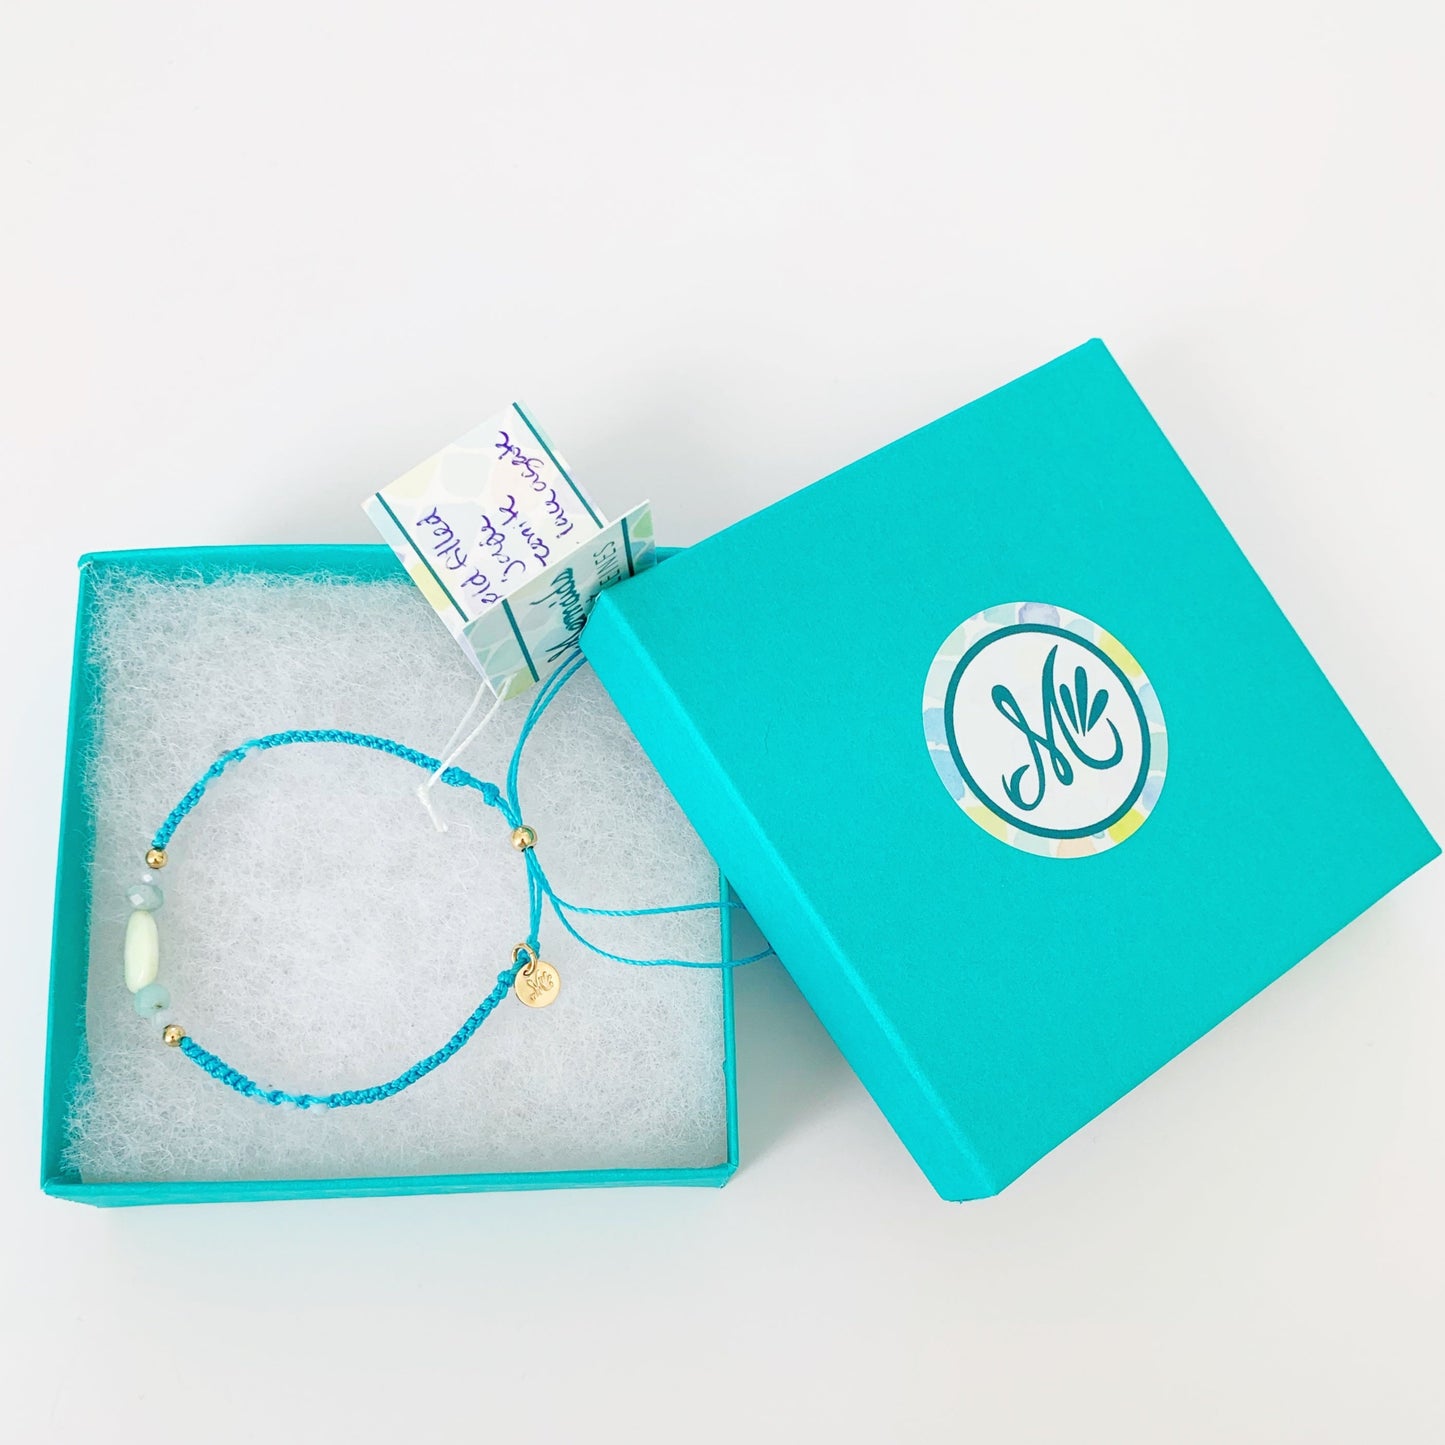 The captiva macrame bracelet in color blue crush pictured in a teal gift box on top of a white surface